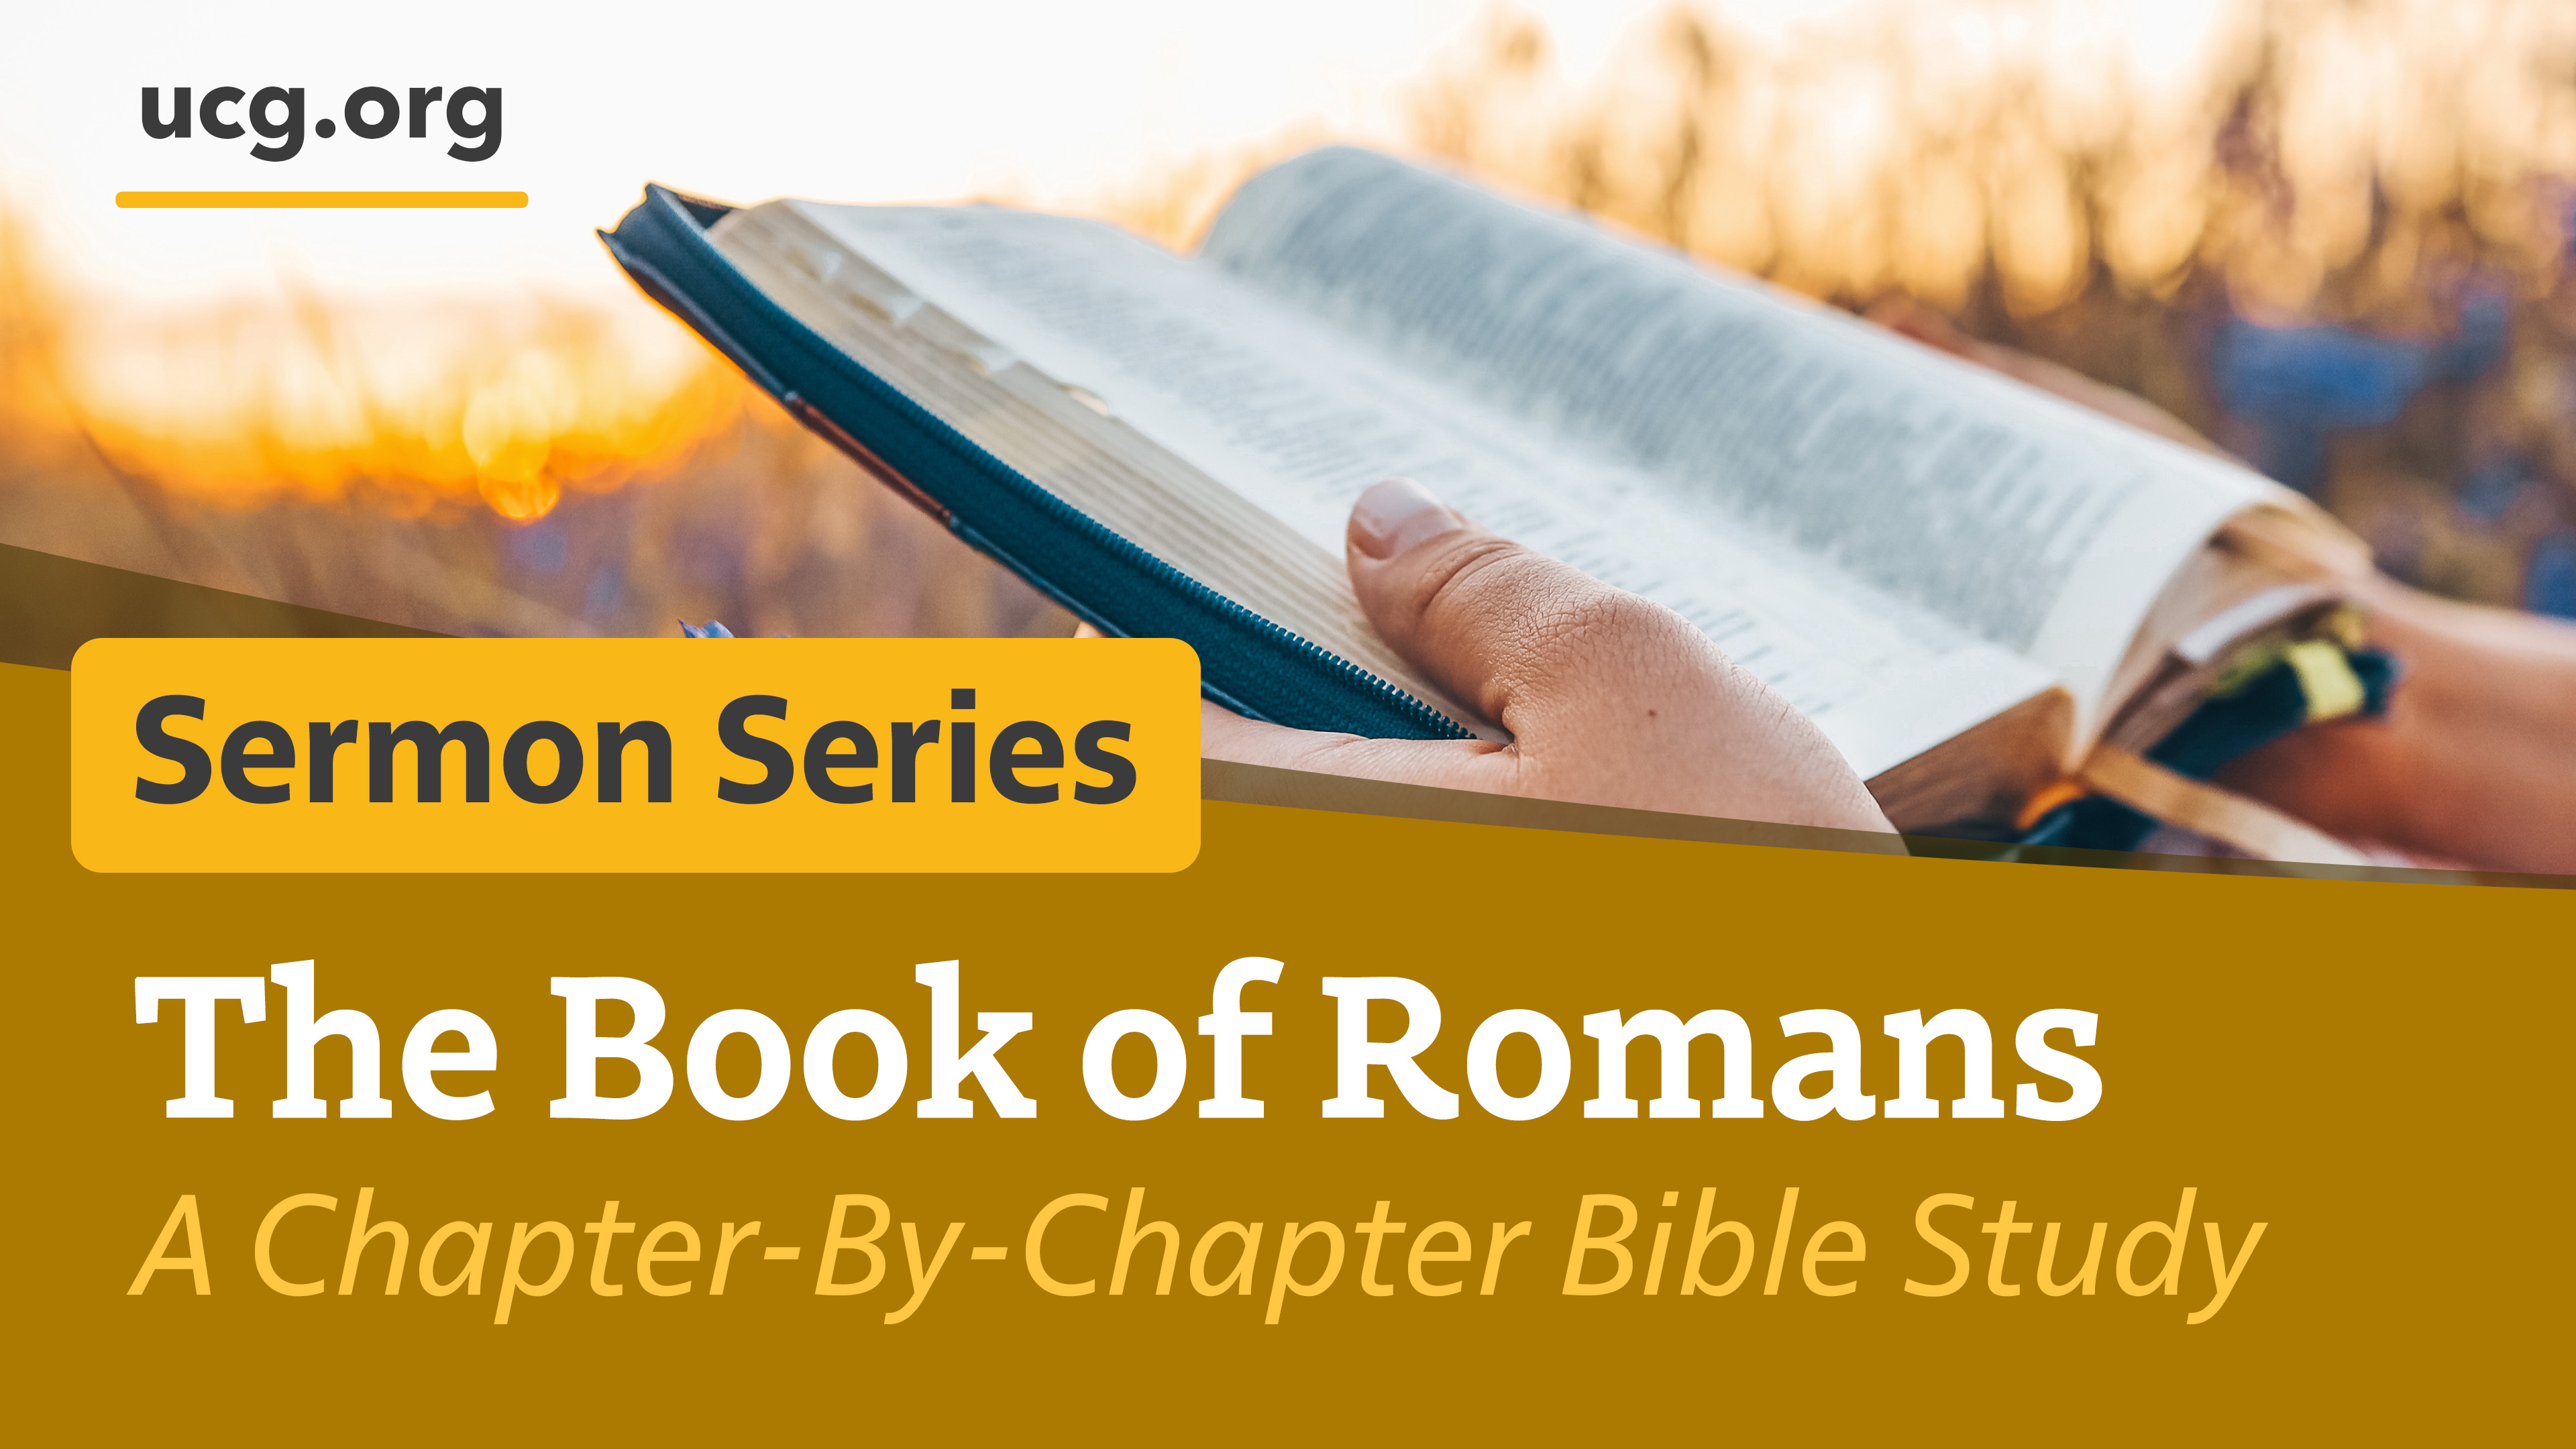 Study of the Book of Romans series